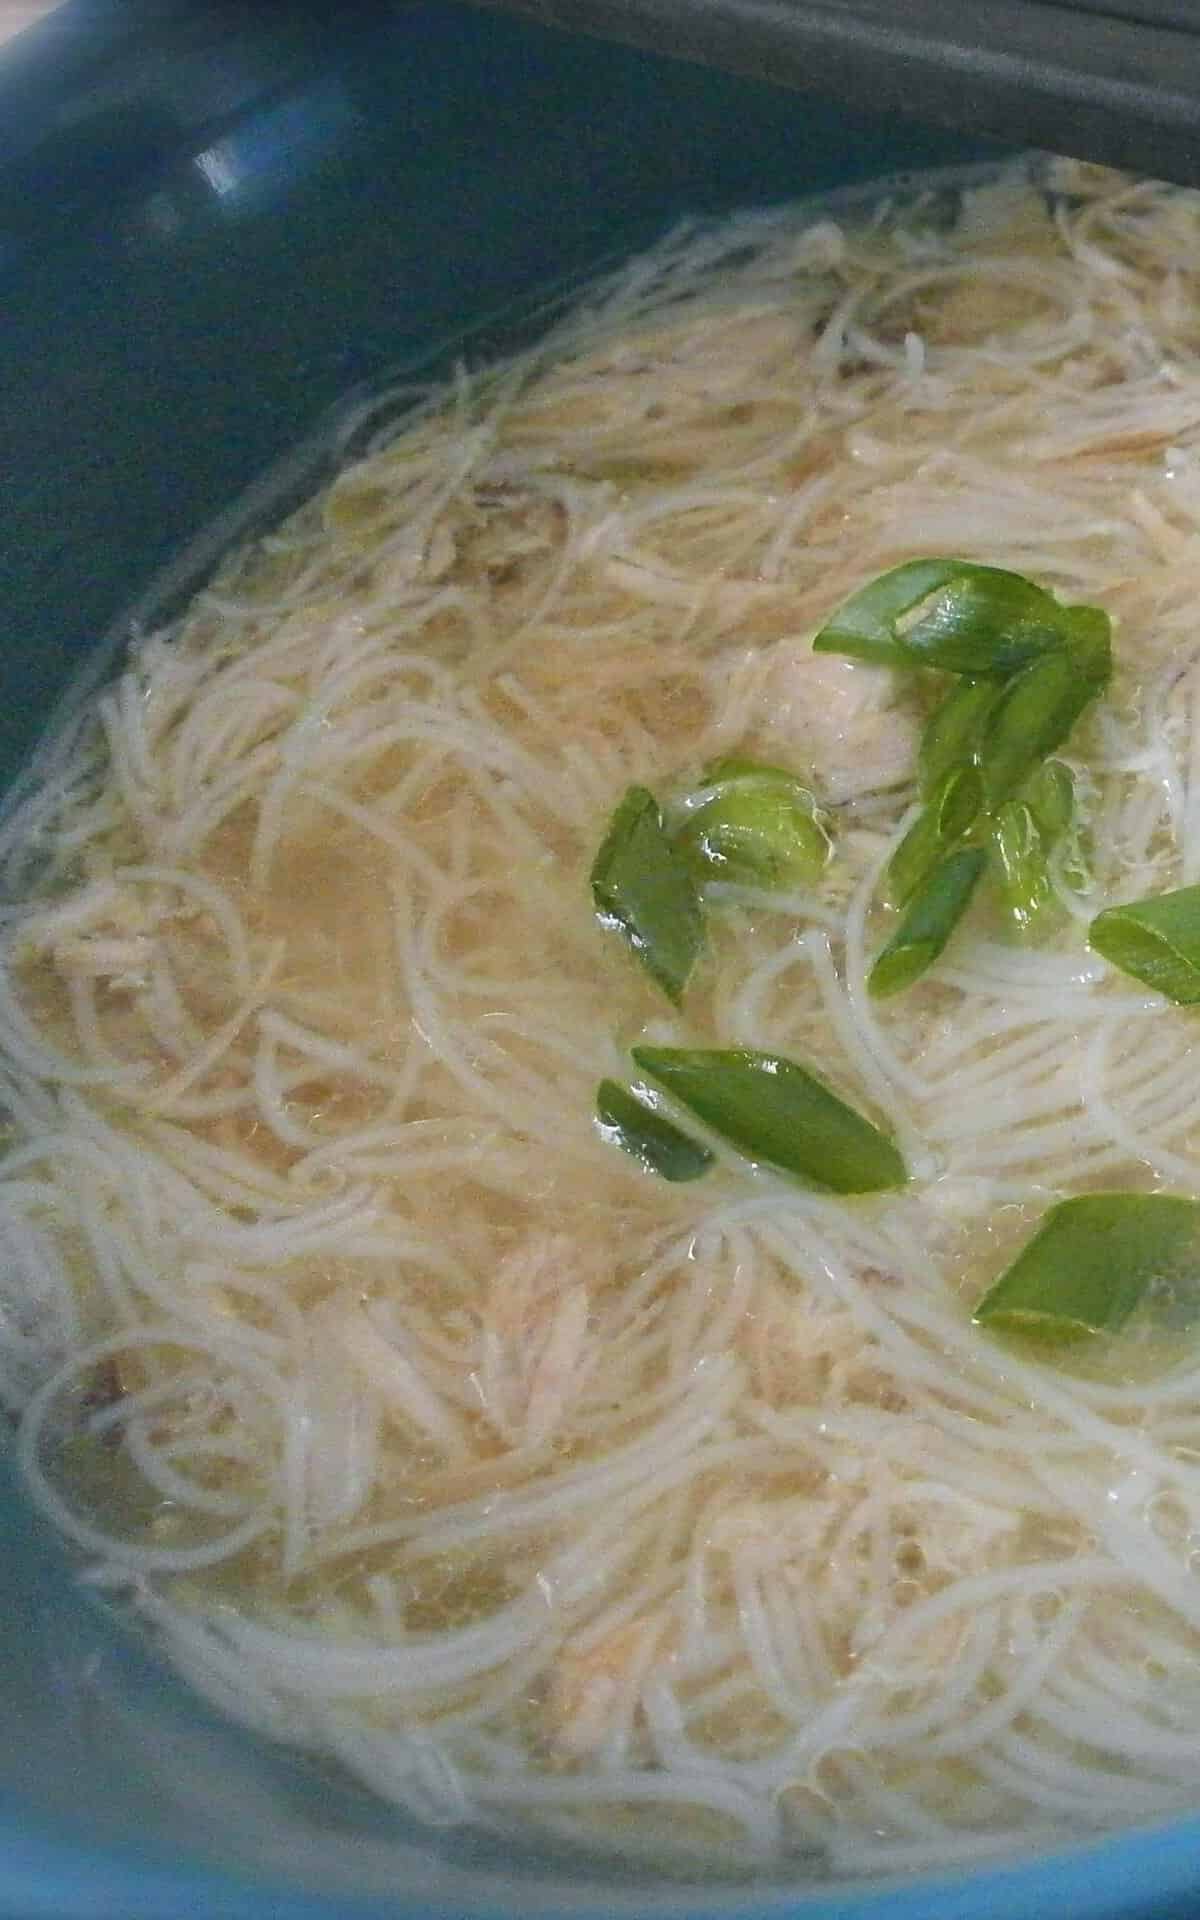  A warm hug in a bowl: Vietnamese Ginger Chicken Soup